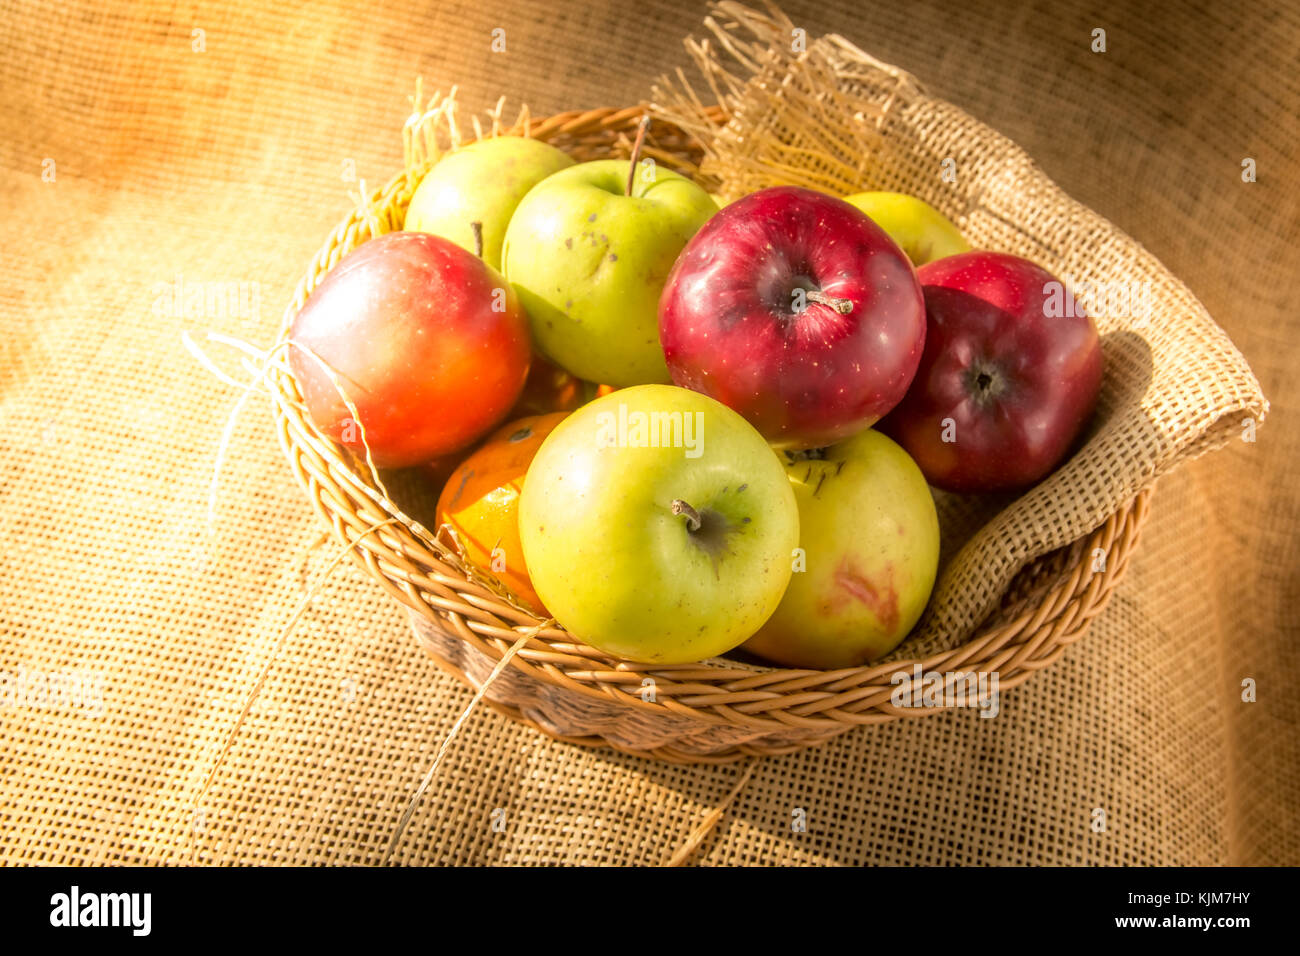 Green and red apples in a basket on burlap background with morning sun shine. Stock Photo